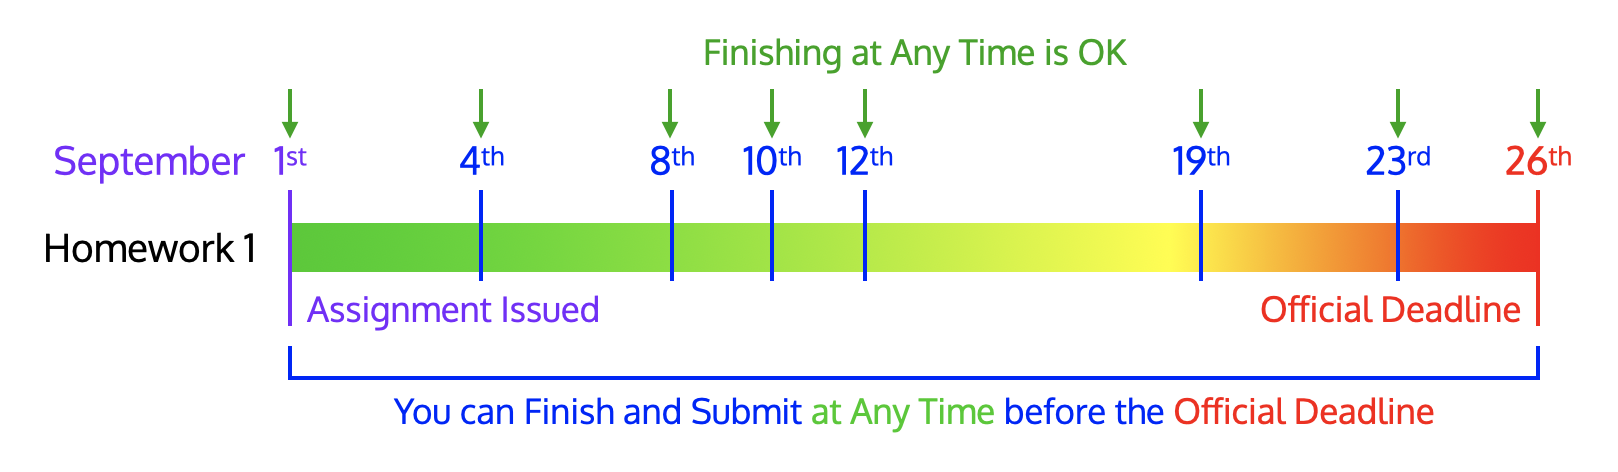 Finish Assignments at Any Time